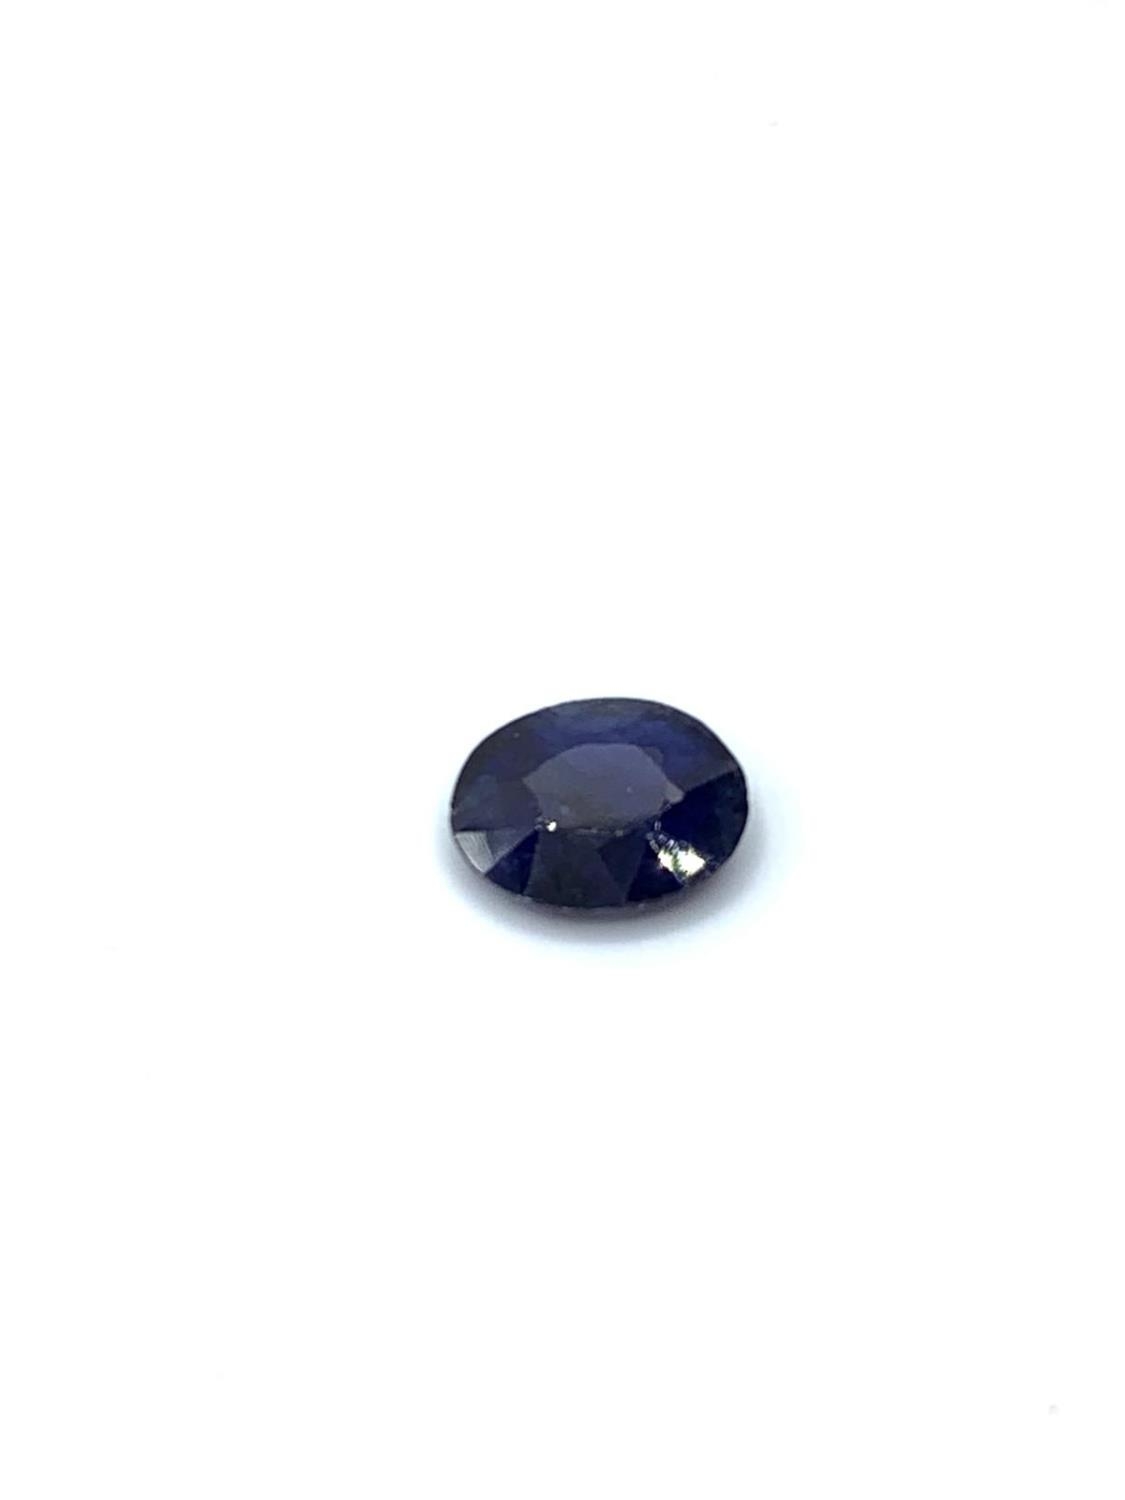 6.31 Ct Sapphire. GJSPC Certified - Image 3 of 5